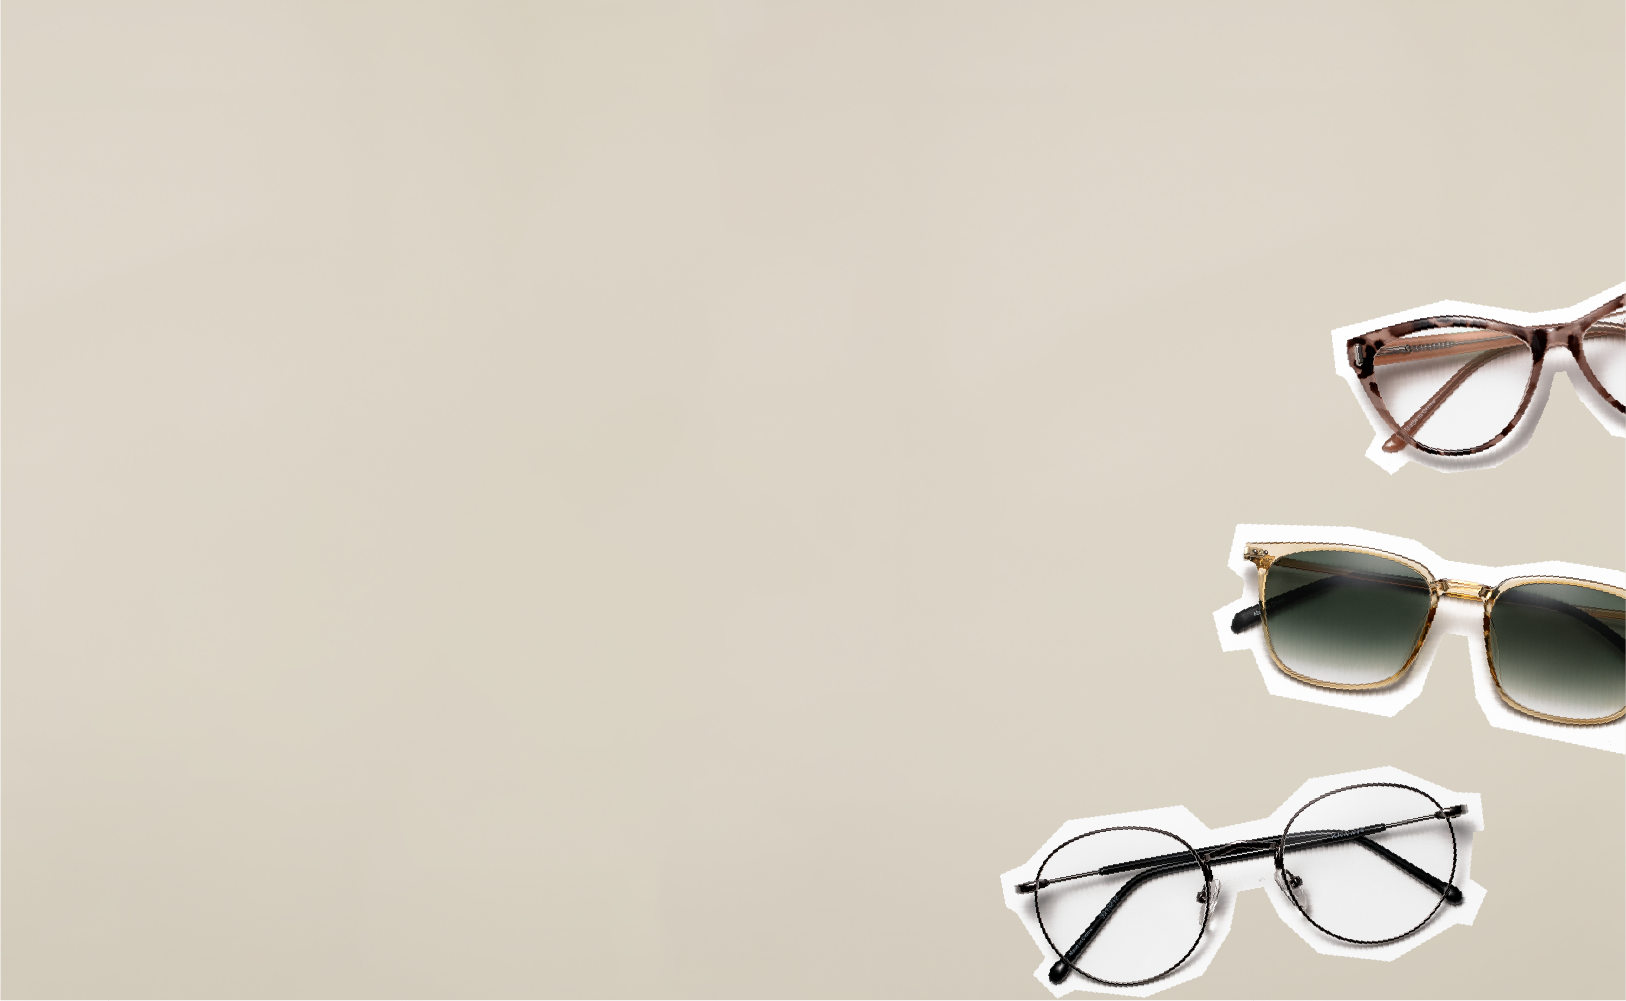 A lay-down display cutout of Zenni cateye glasses, round glasses, and square sunglasses.